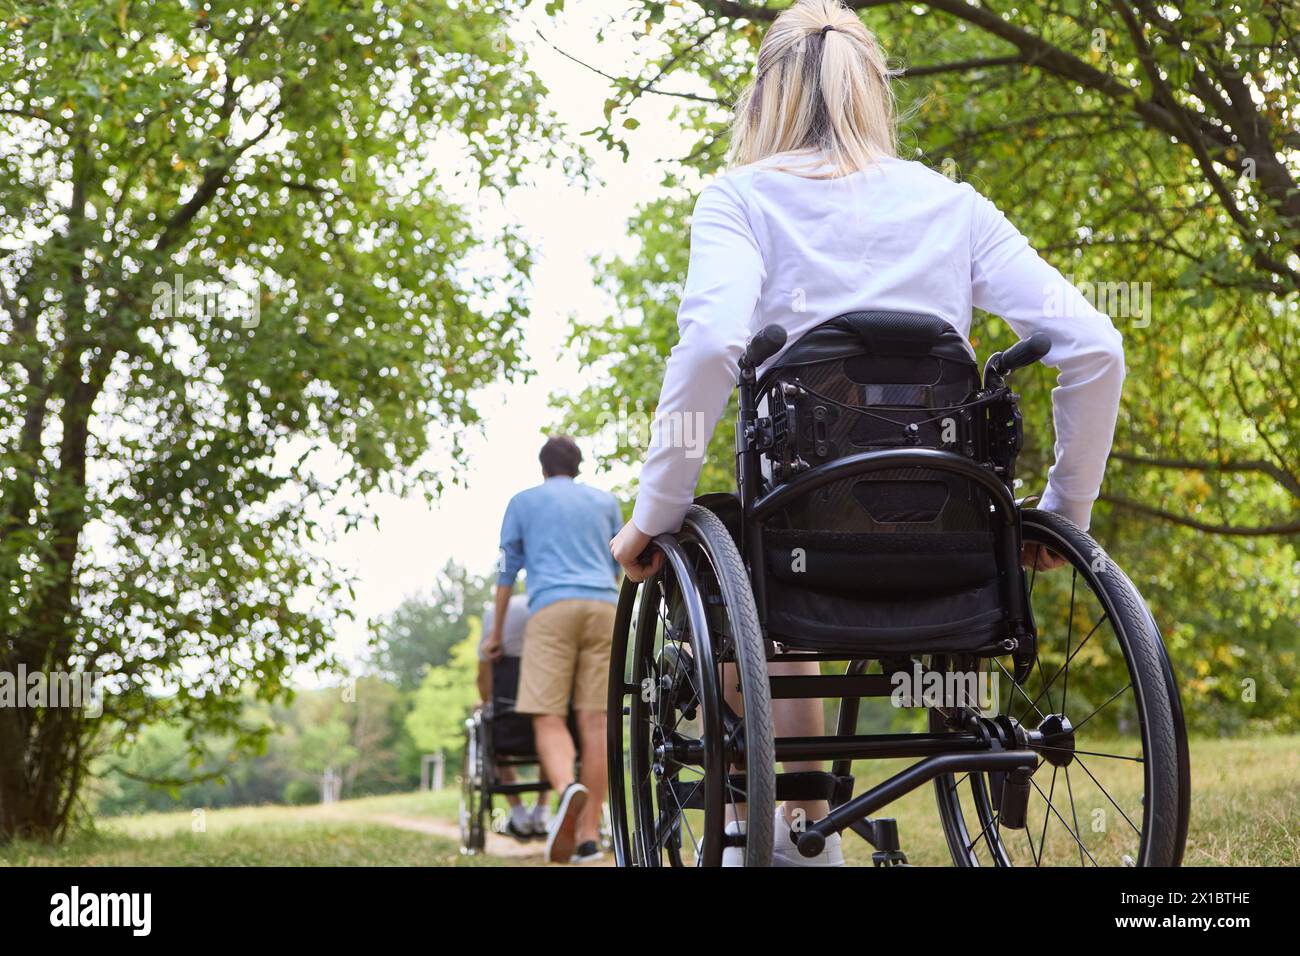 Two individuals who use wheelchairs are spending time outdoors surrounded by greenery, signifying inclusion and accessibility Stock Photo